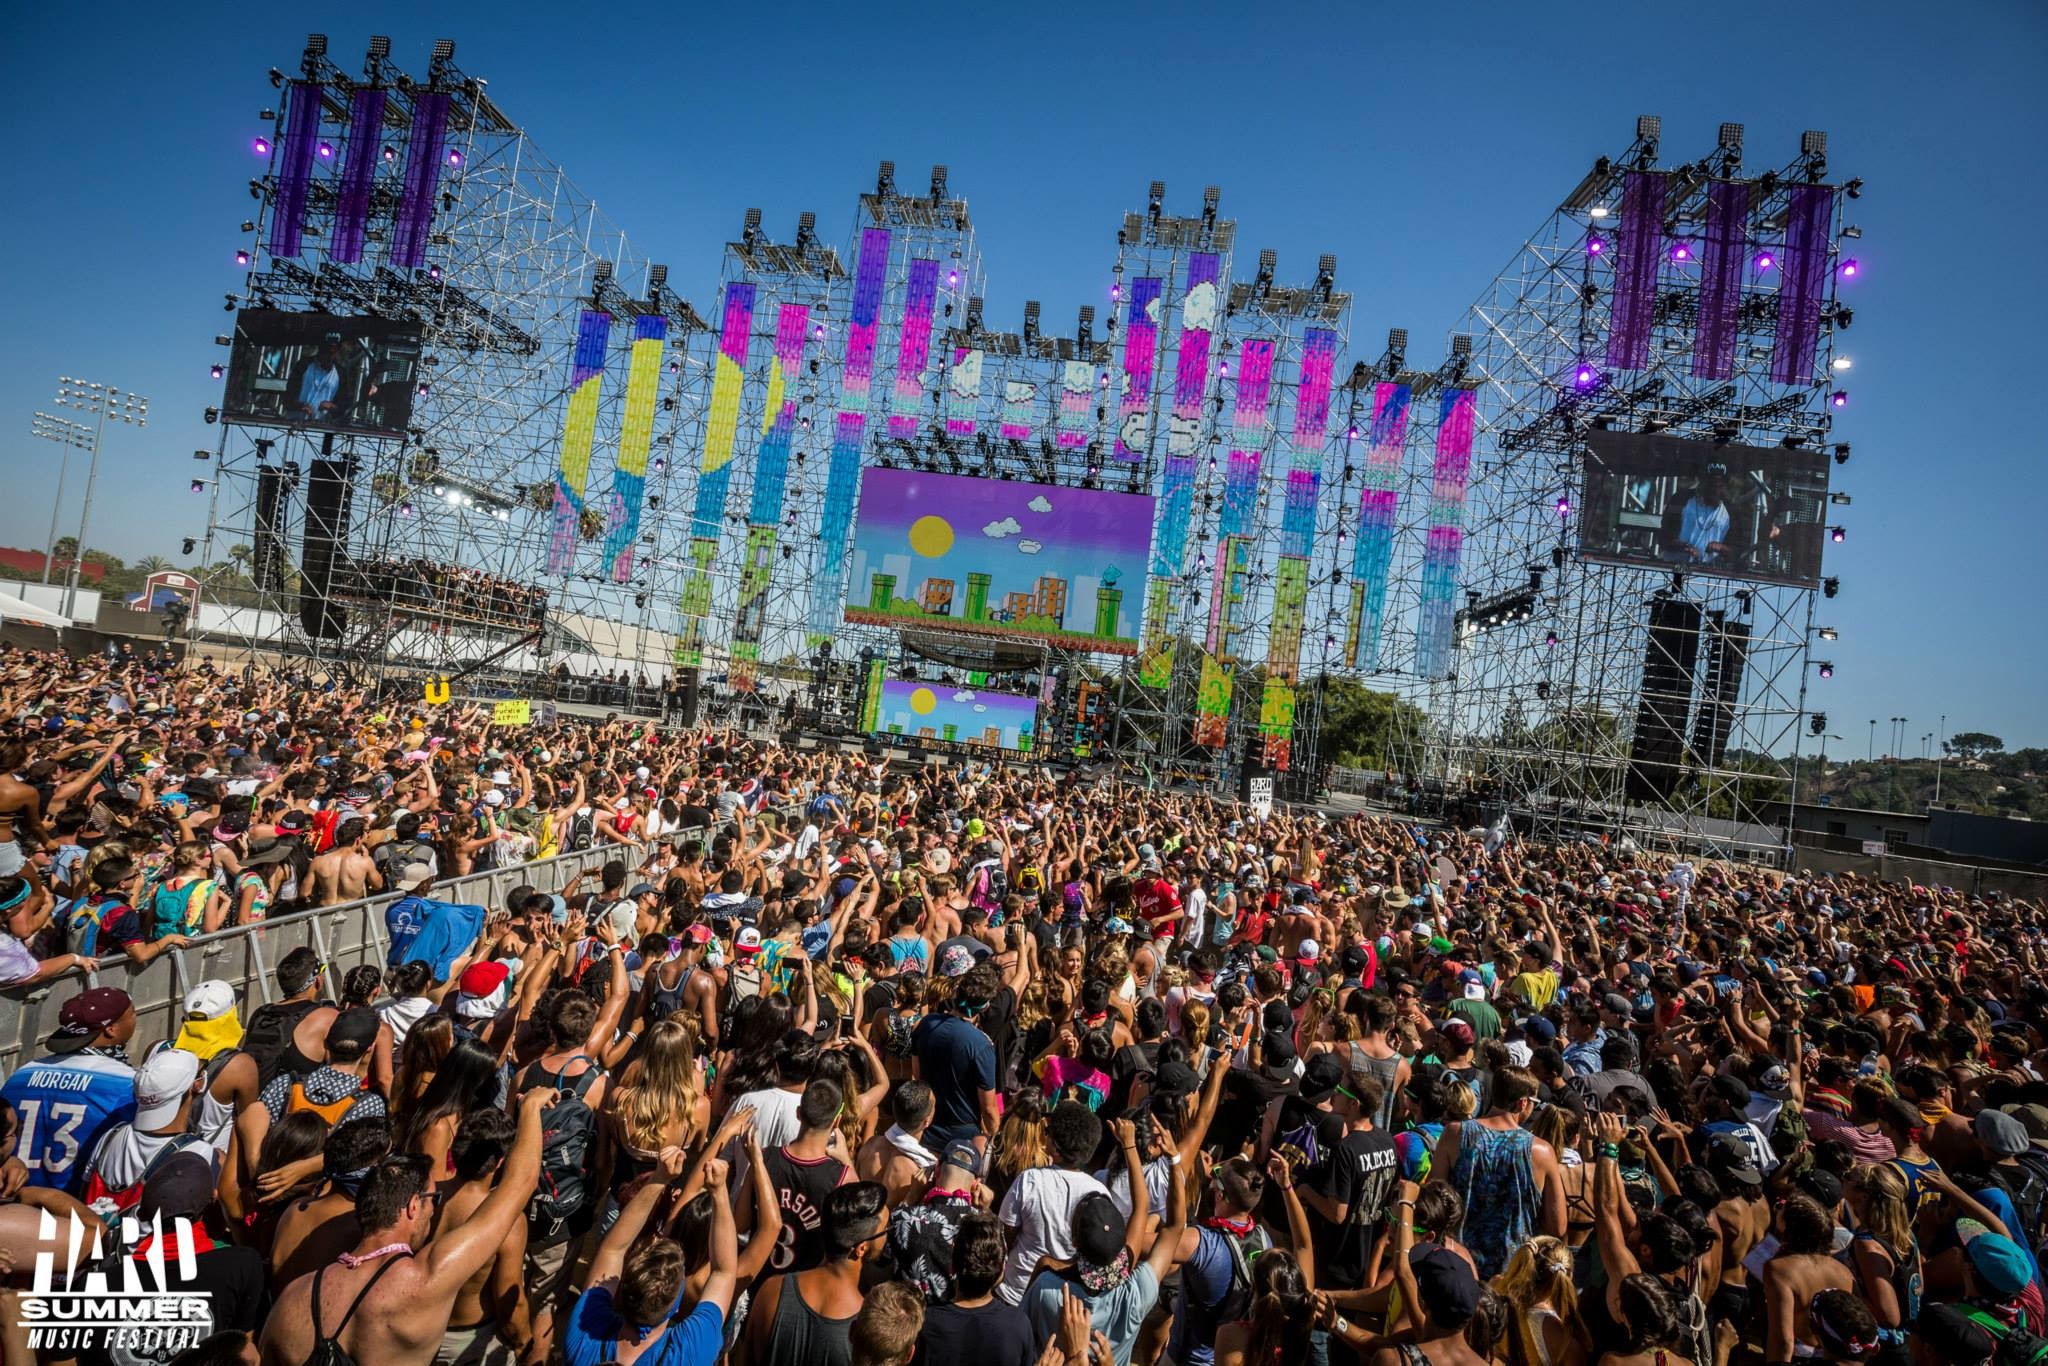 HARD Summer 2016 Reveals Impressive Lineup New Location Featuring Camping Options